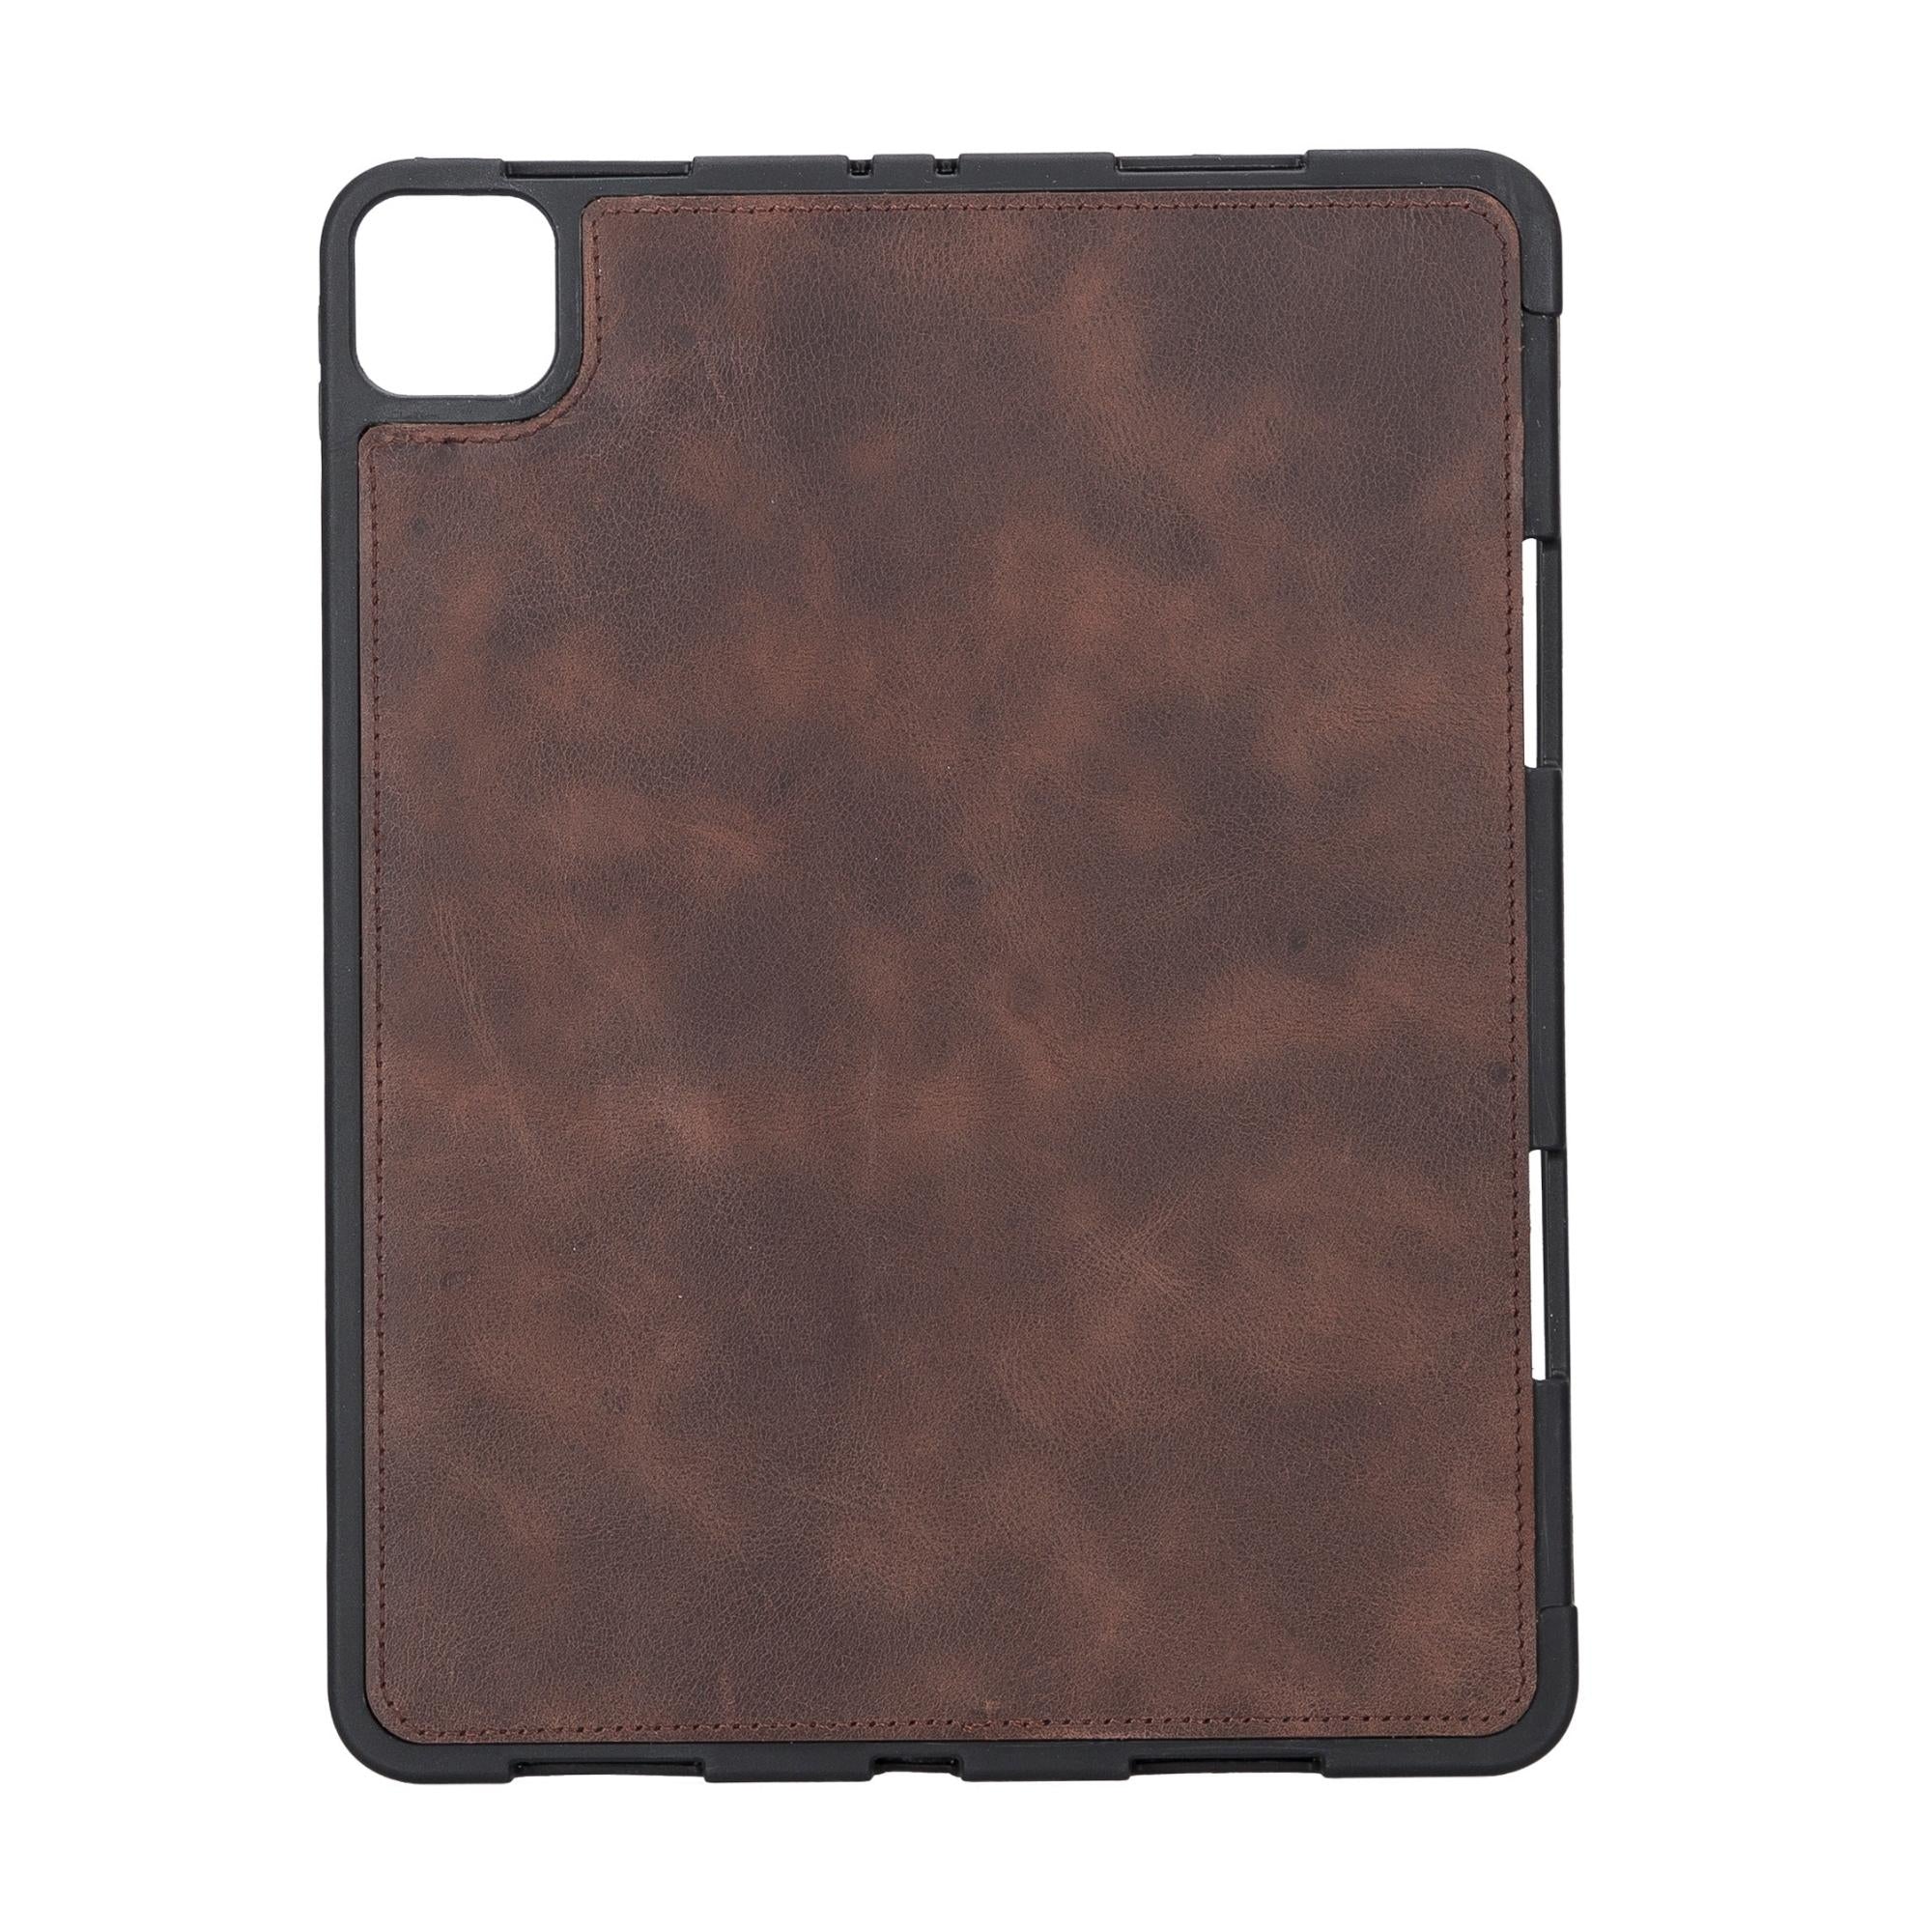 Albany Leather Wallet Case for iPad Pro 11-inch - Dark Brown - 5th Generation-2021 - TORONATA